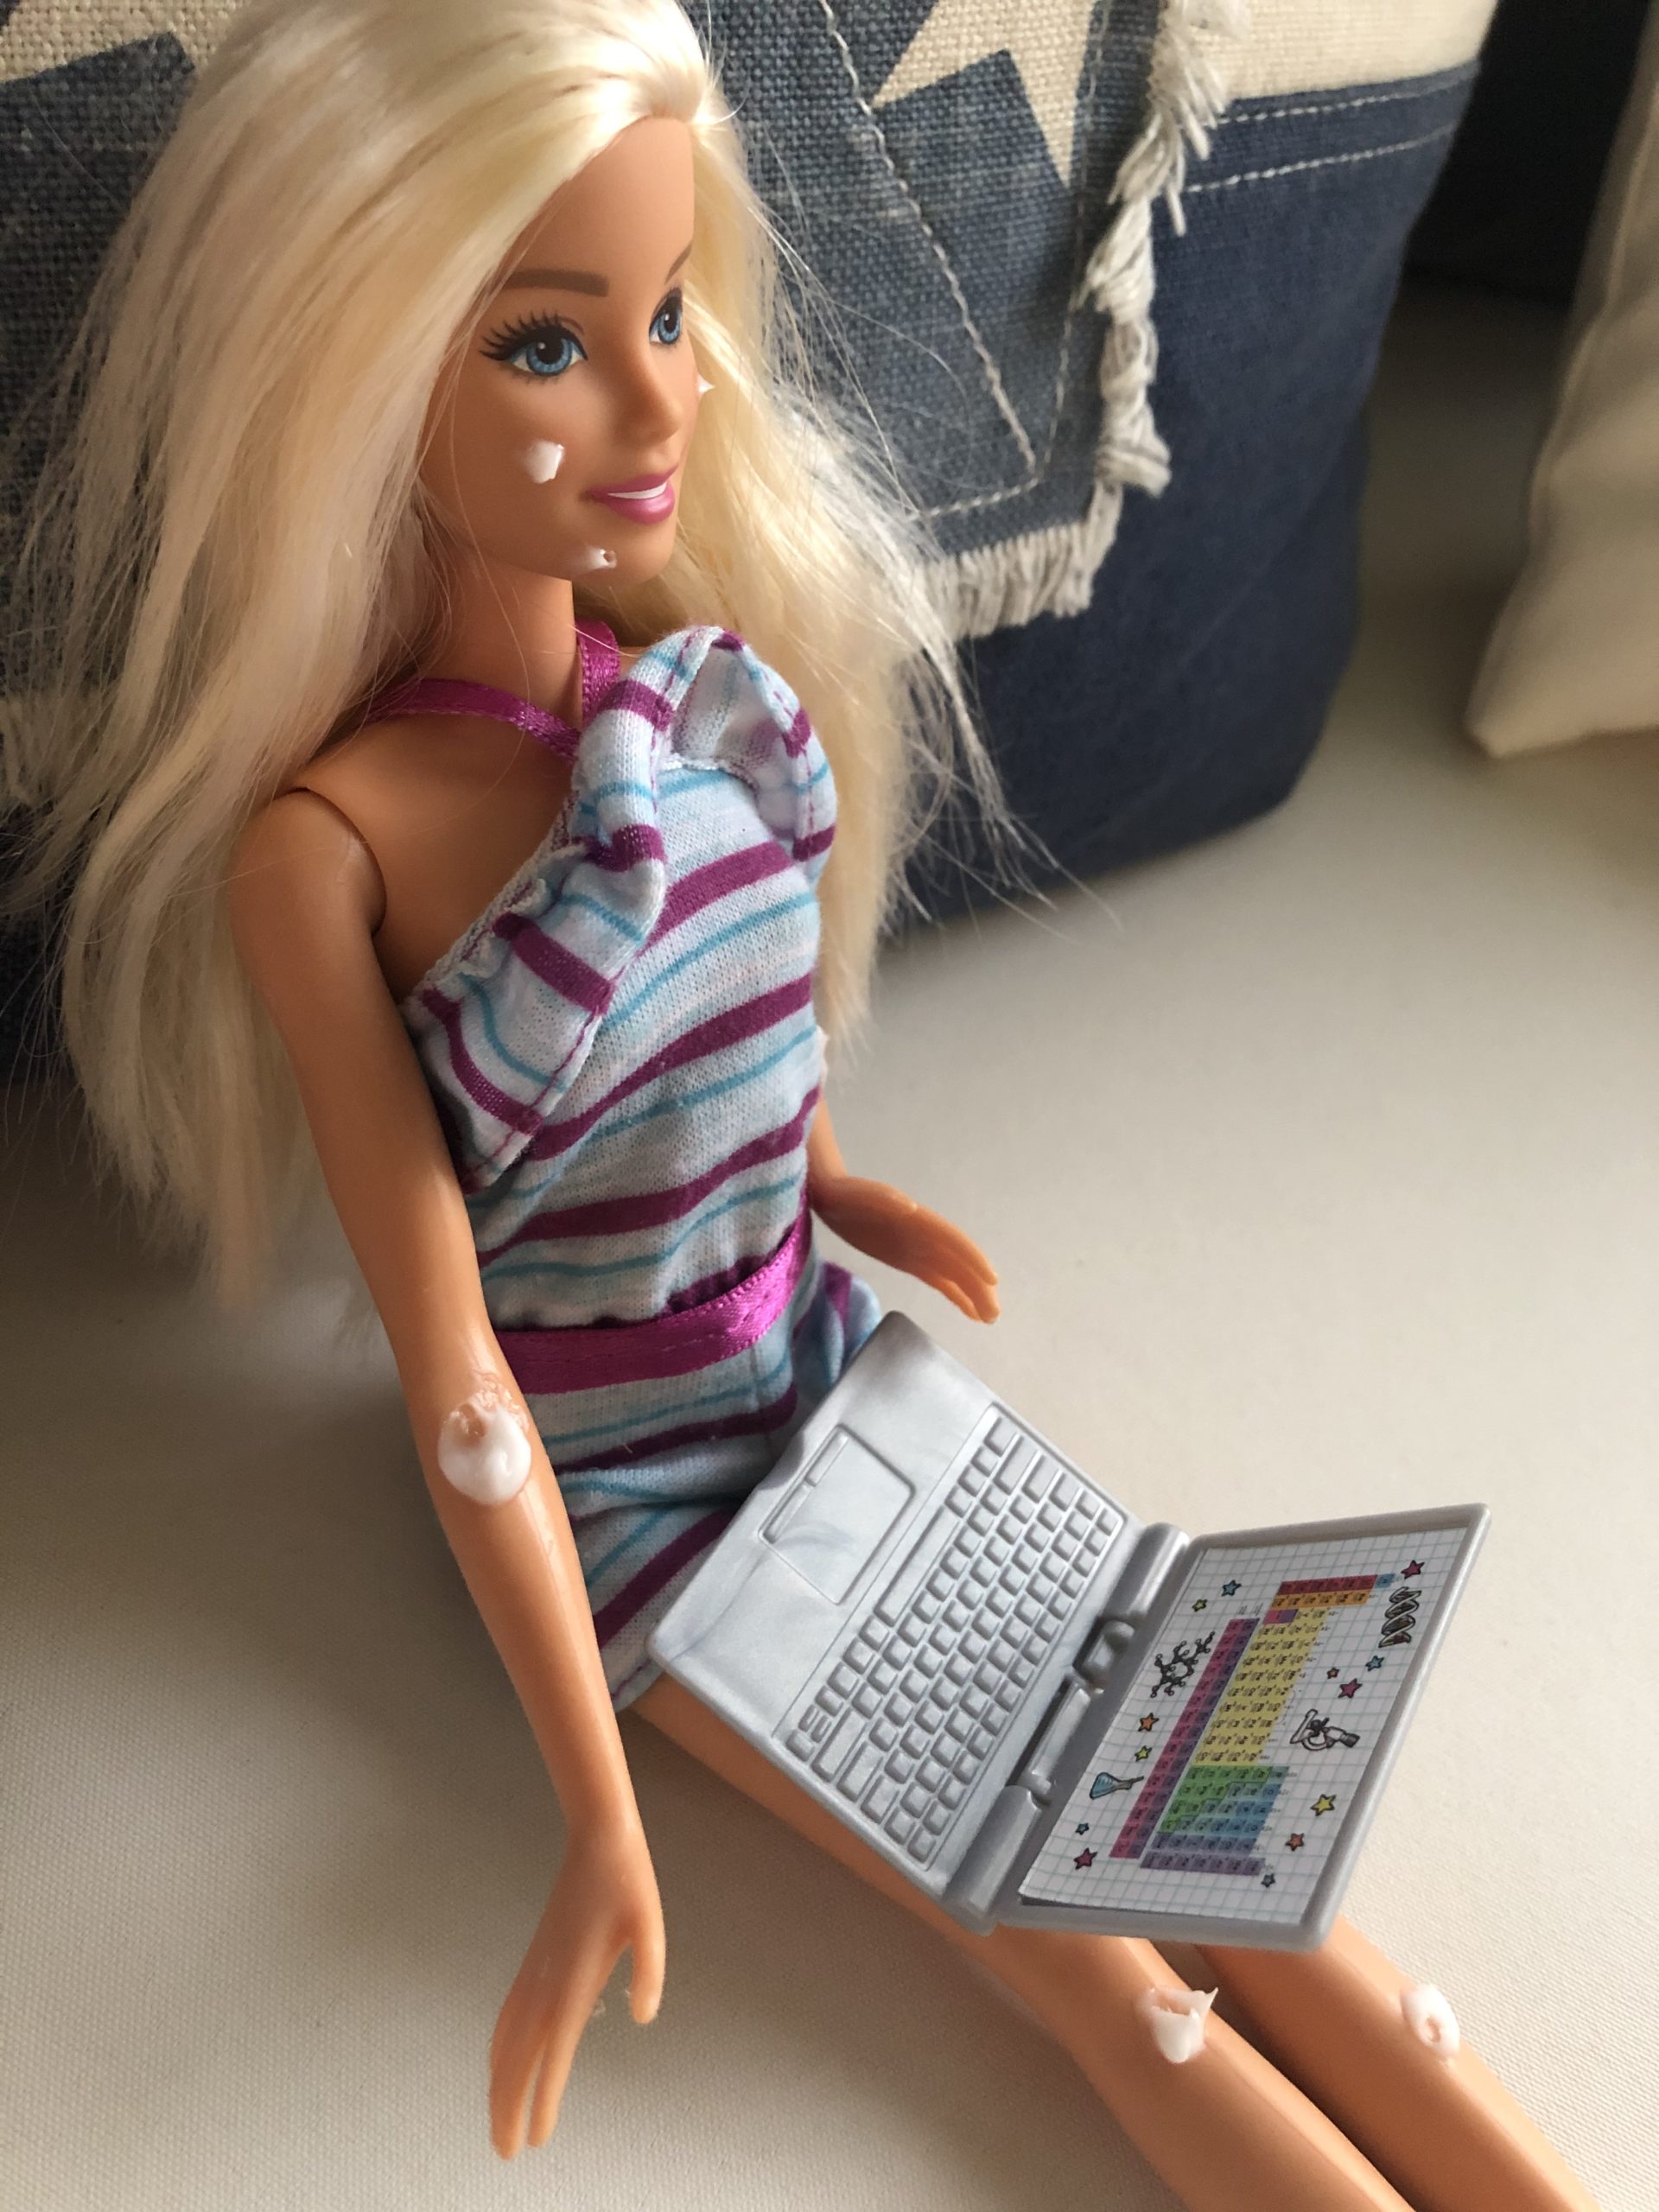 A Barbie Doll with a computer on her lap. she has spots of white cream on her face because she has poison ivy in the Barbie Story, The Spotted Day.